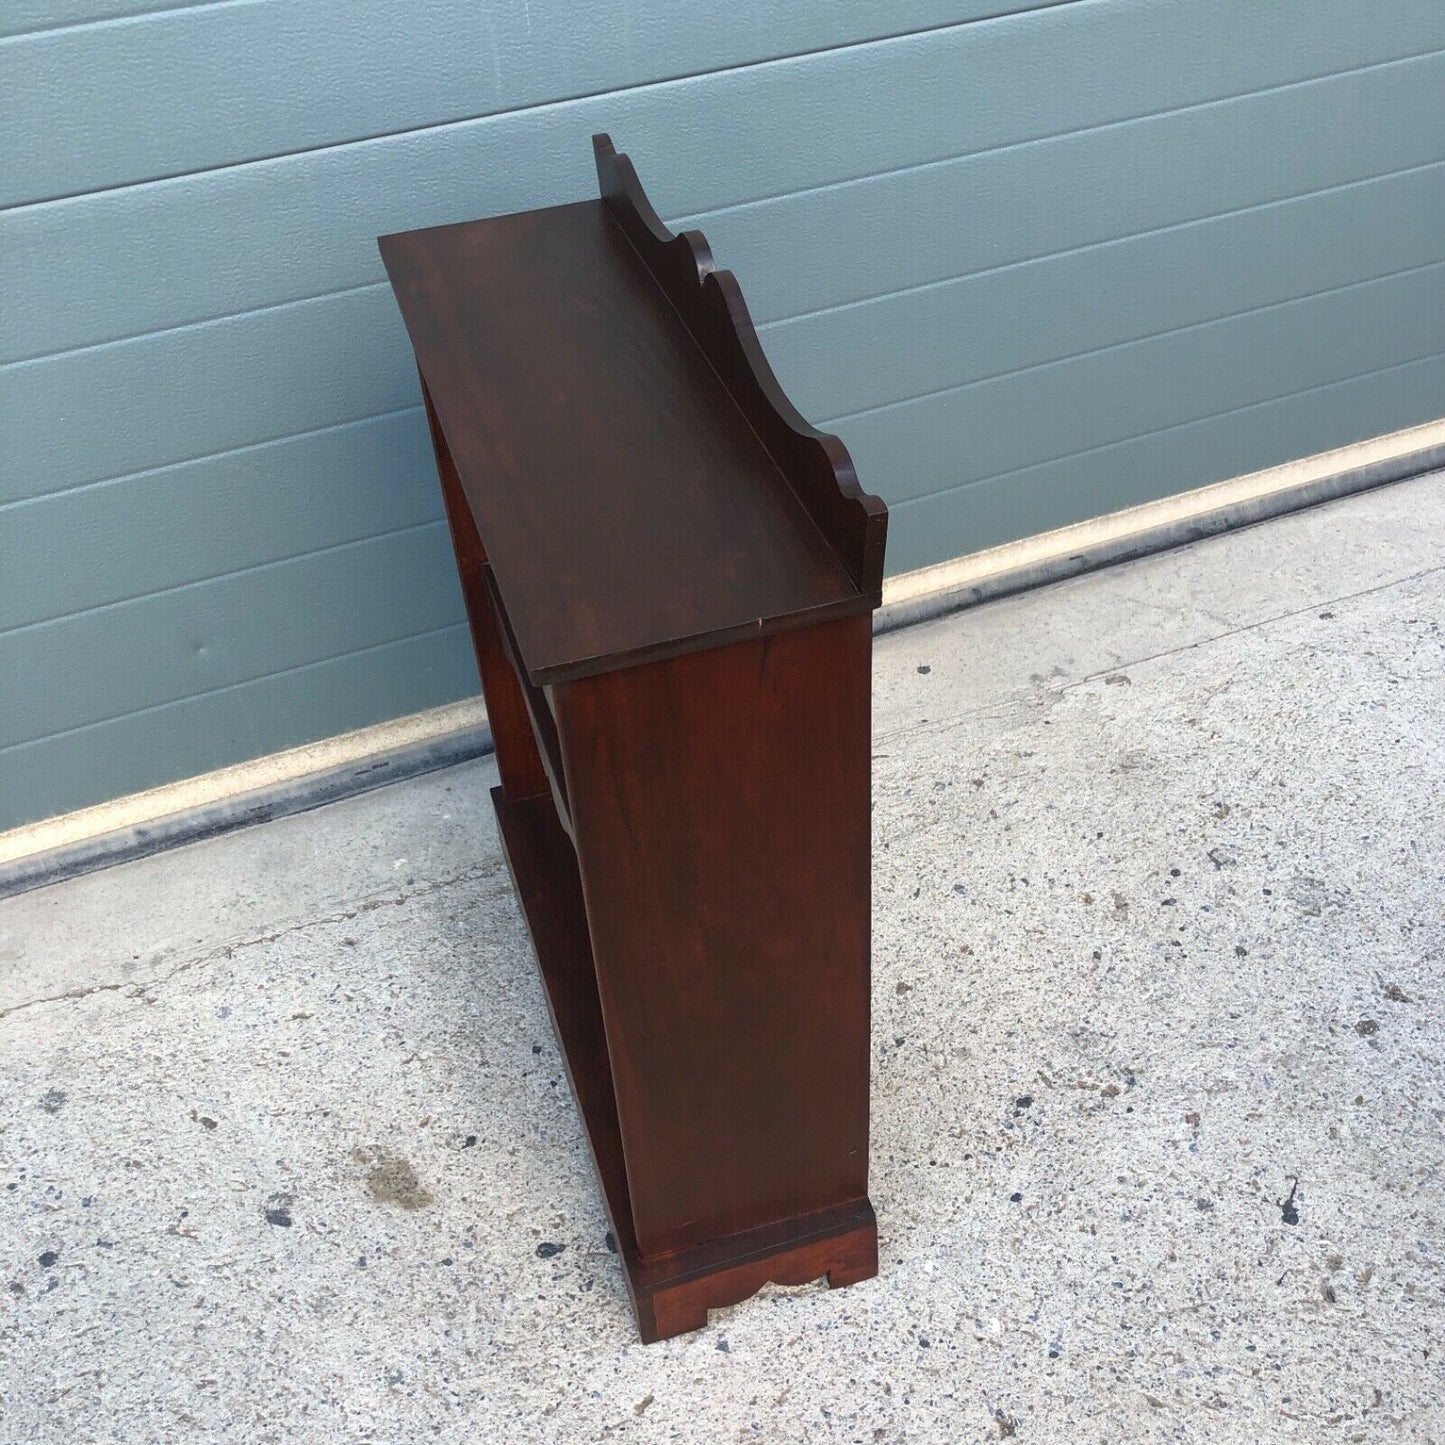 Mahogany Shelves Or Vintage Small Bookcase ( SOLD )